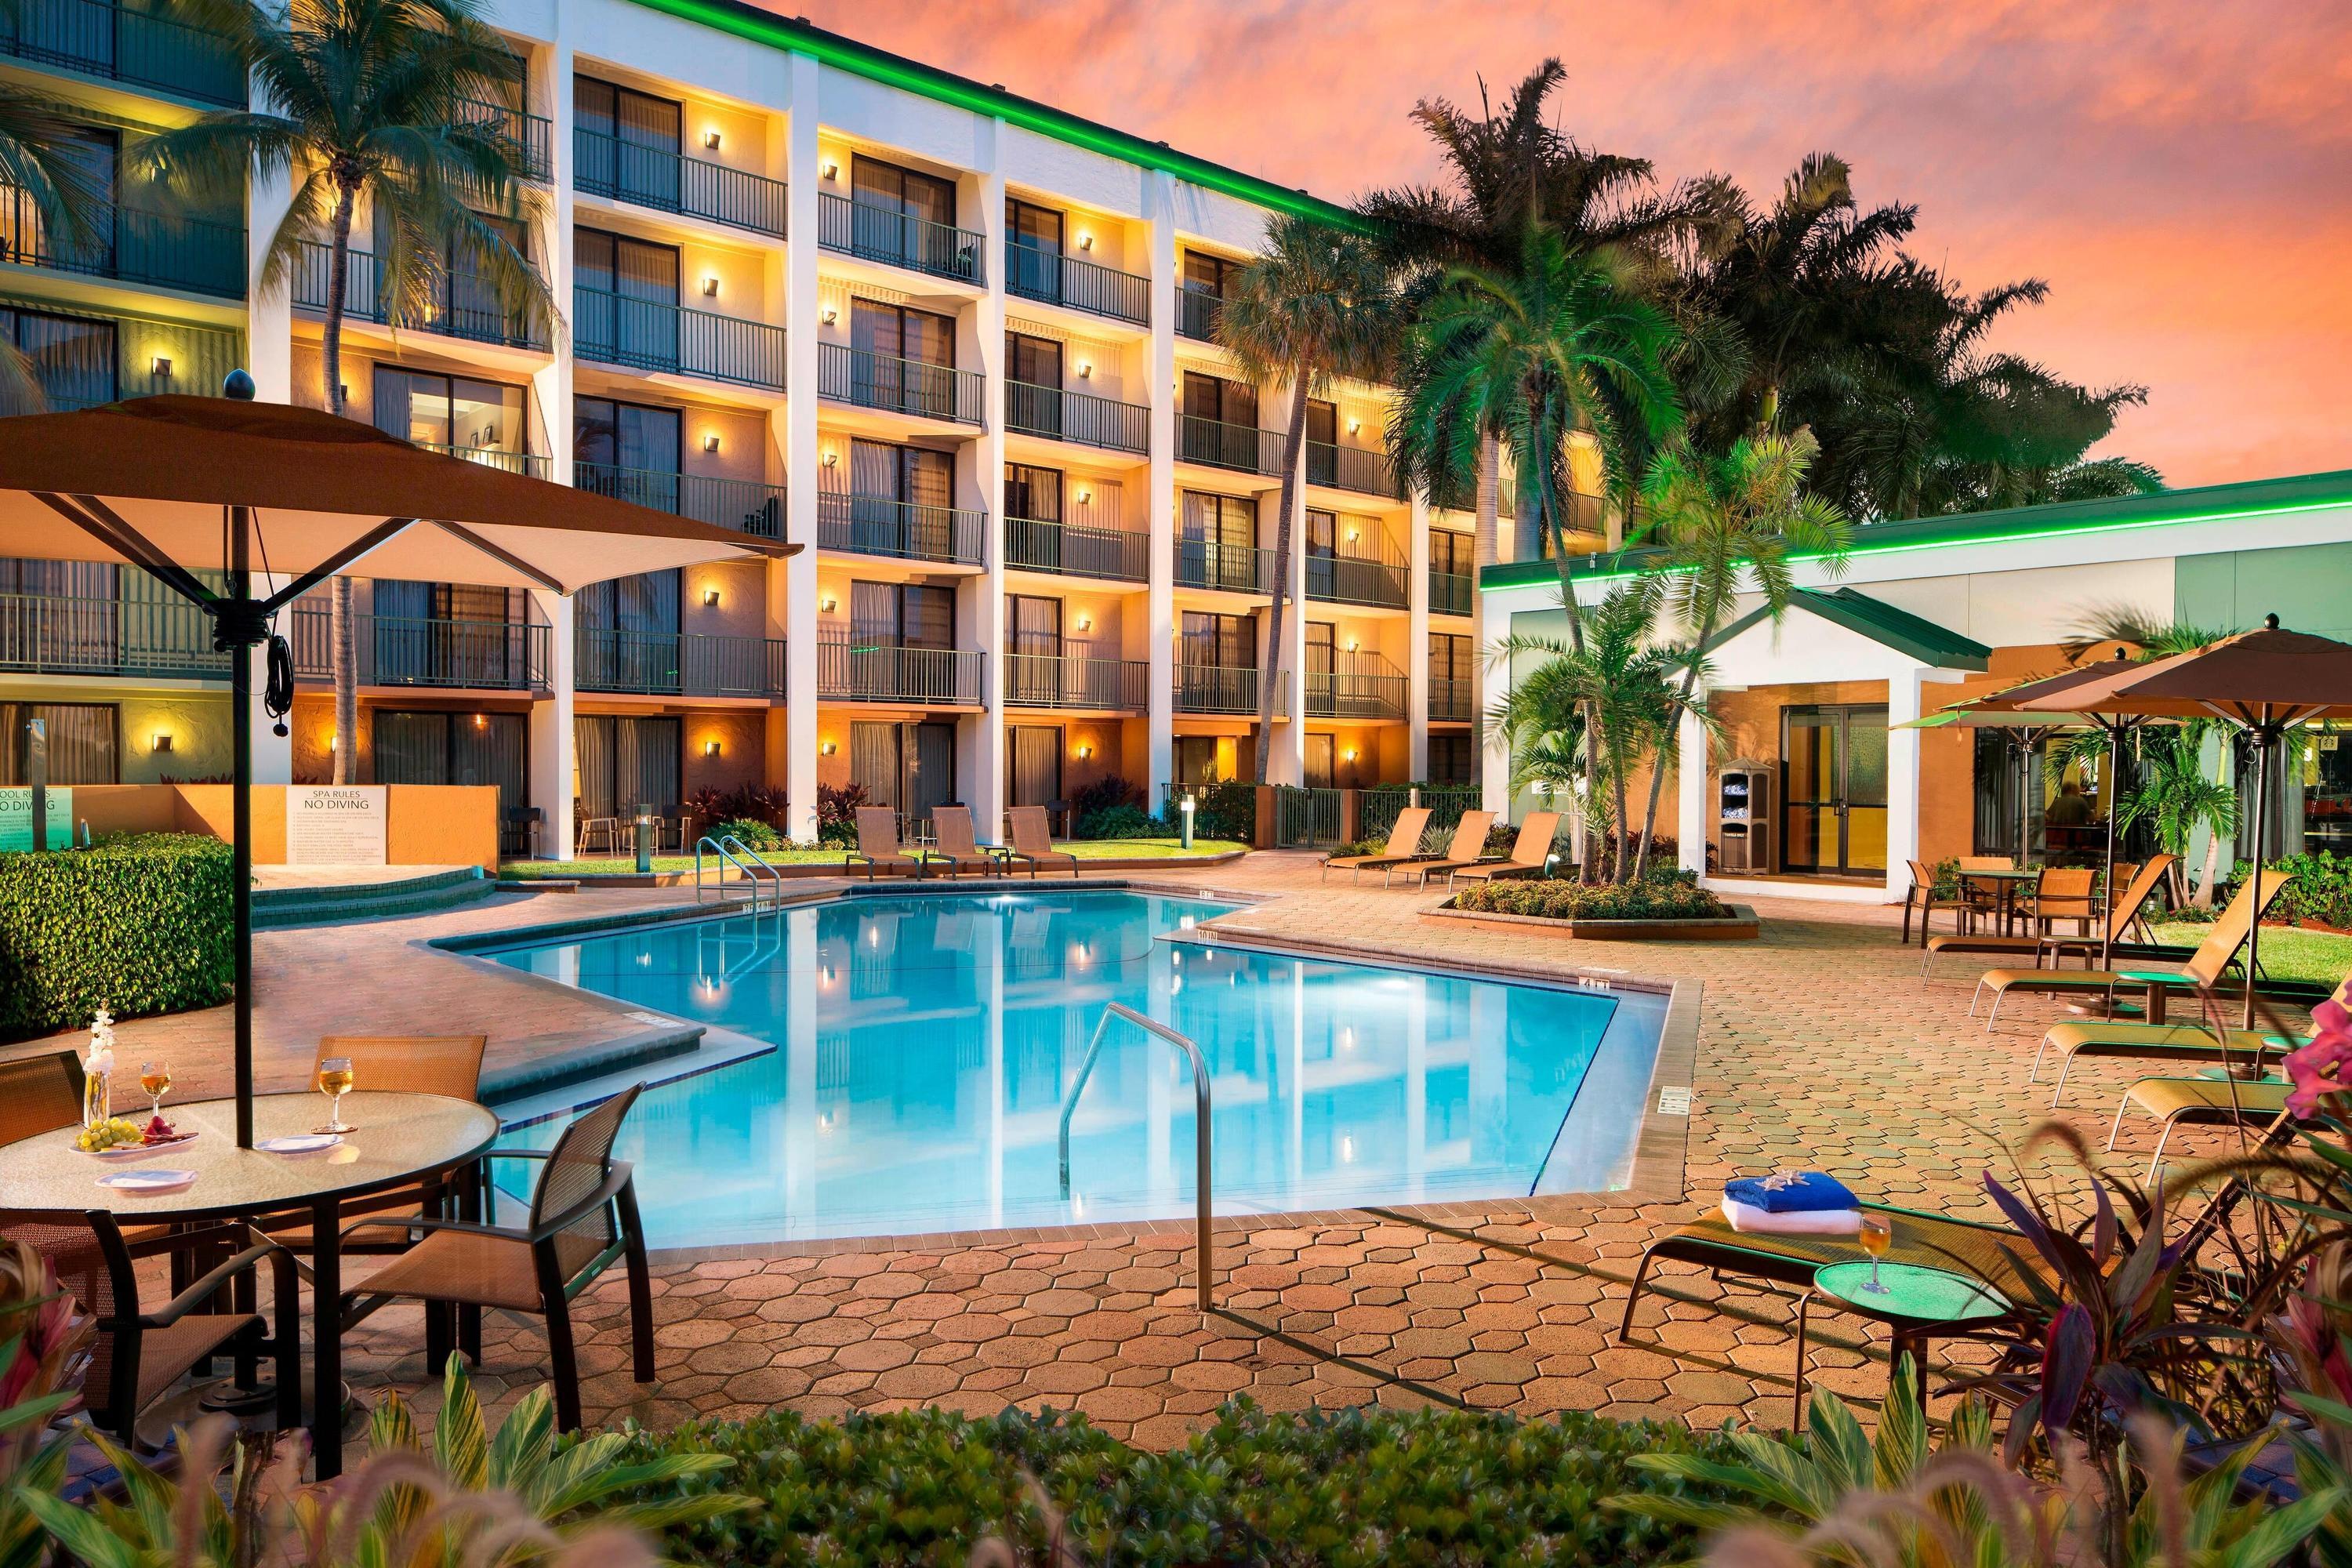 16 Best Hotels in Fort Lauderdale. Hotels from $115/night - KAYAK